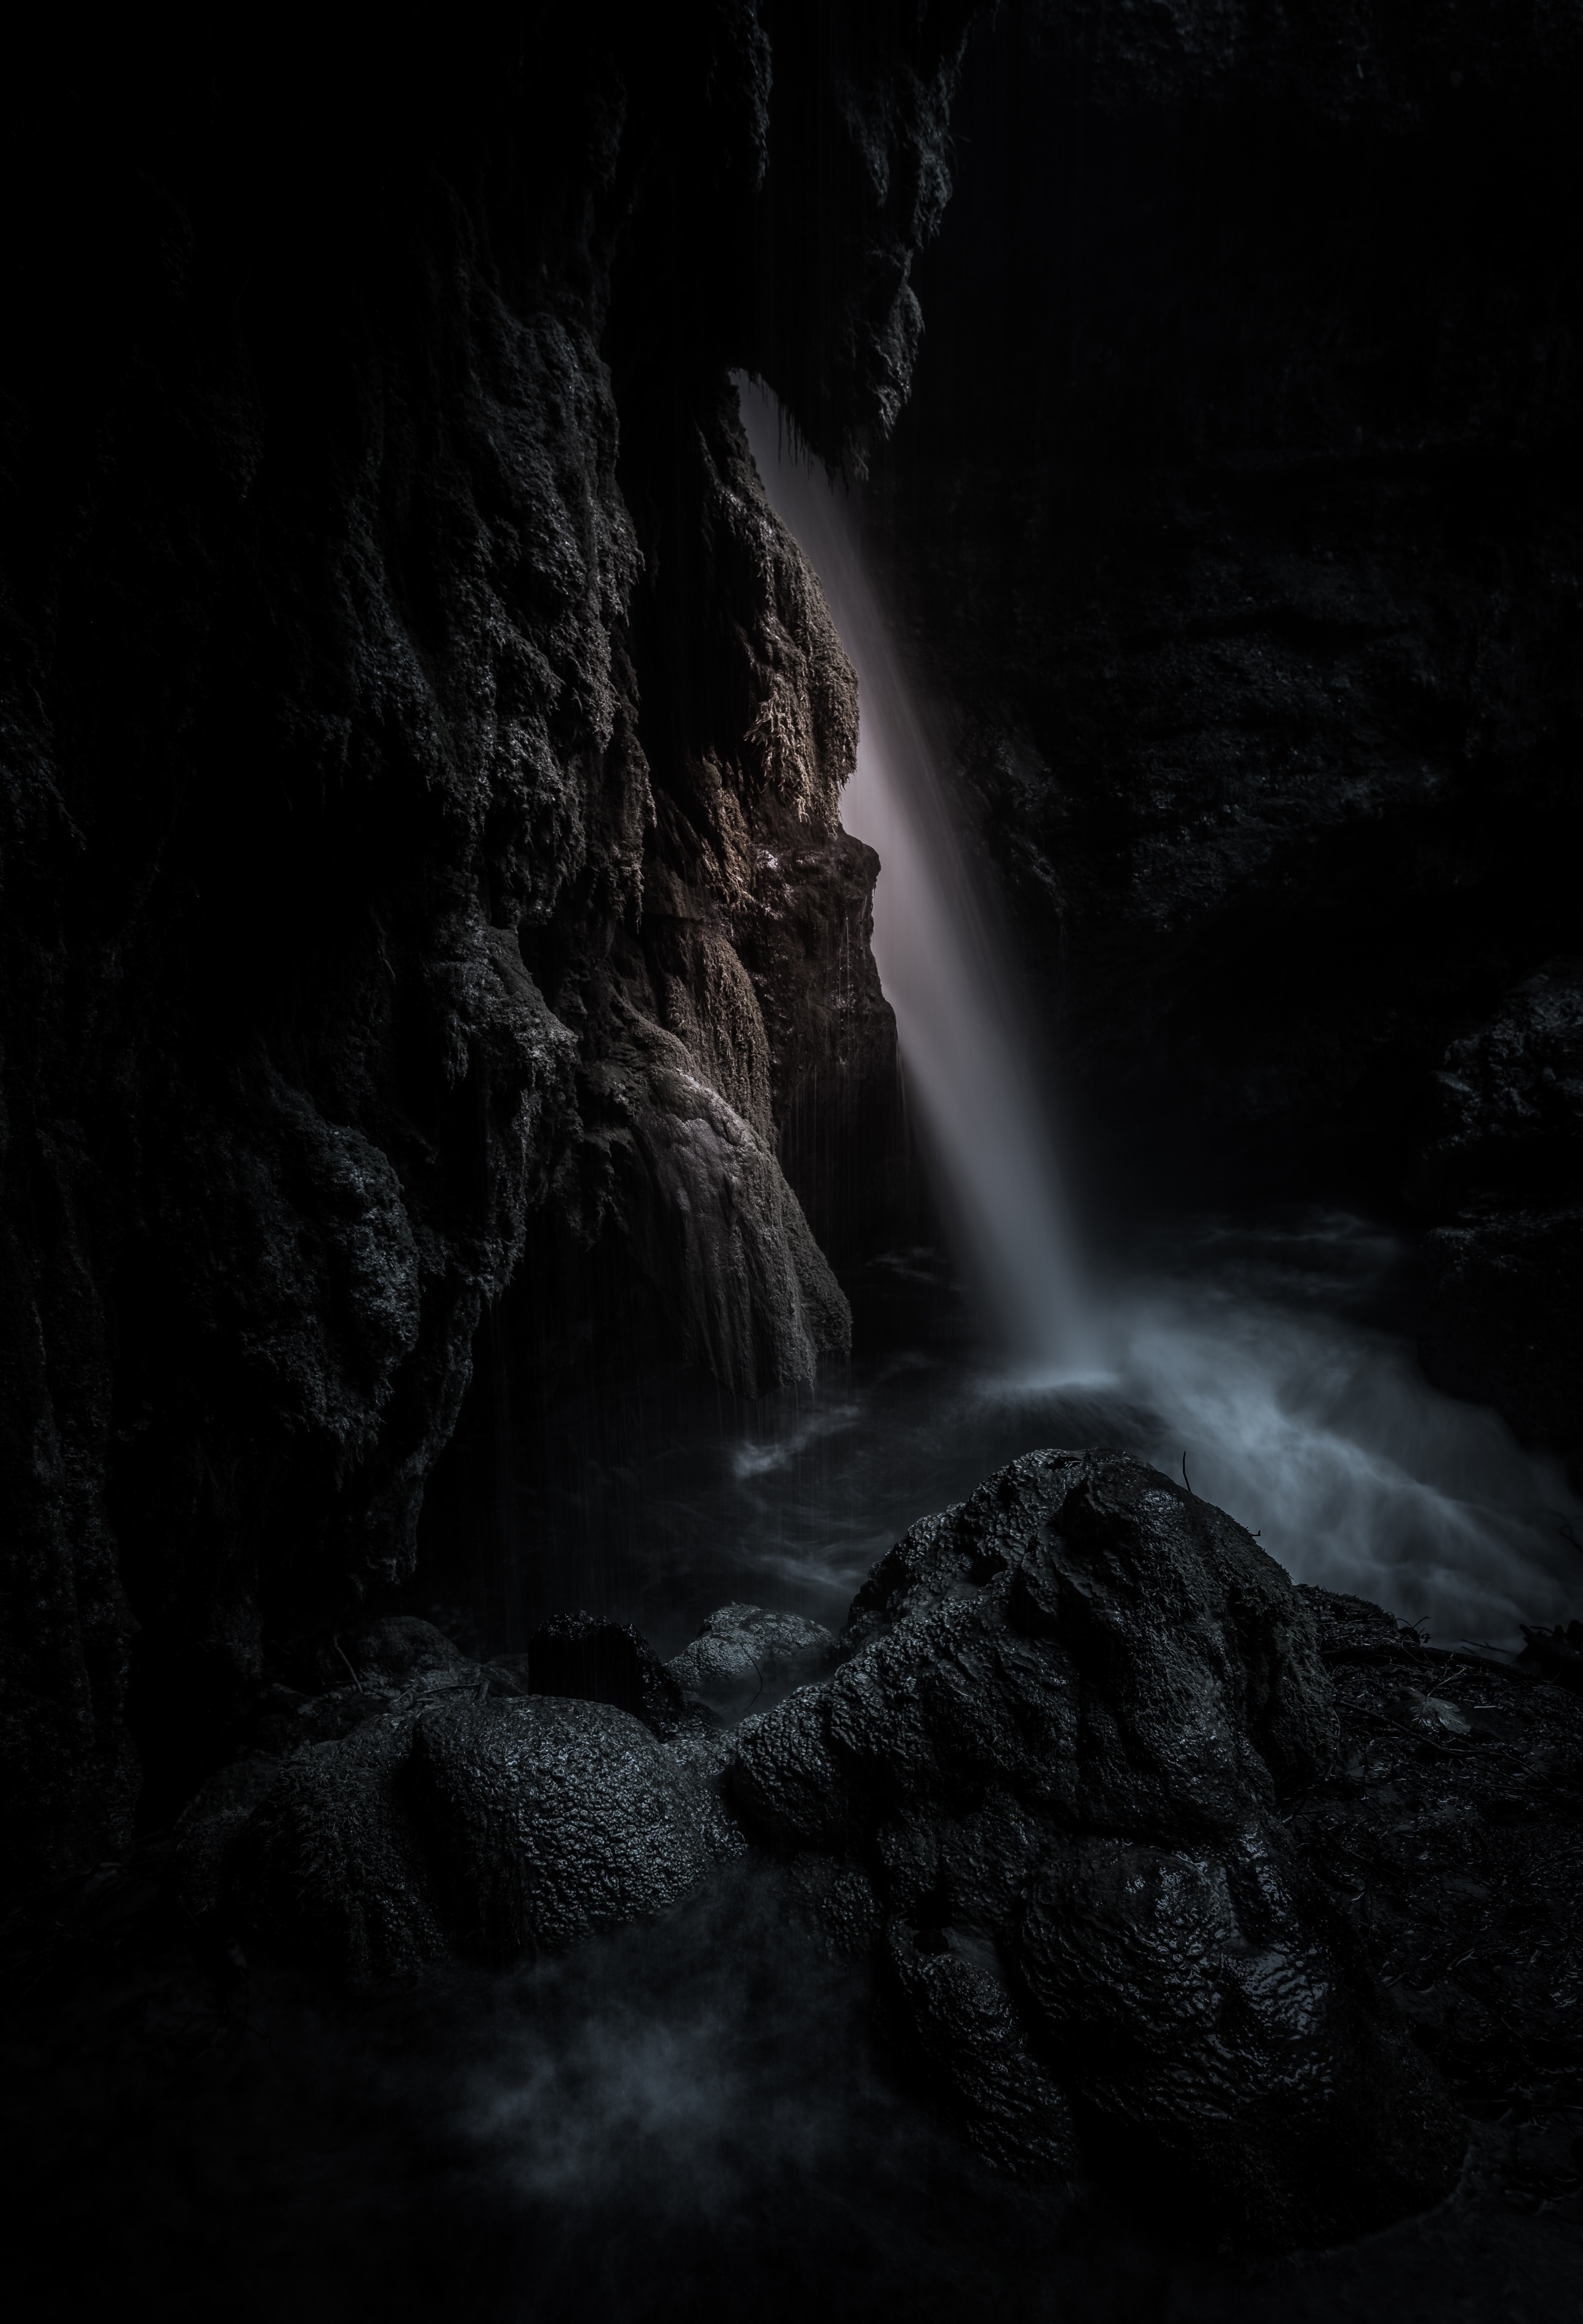 59483 download wallpaper rock, nature, dark, waterfall, cave screensavers and pictures for free